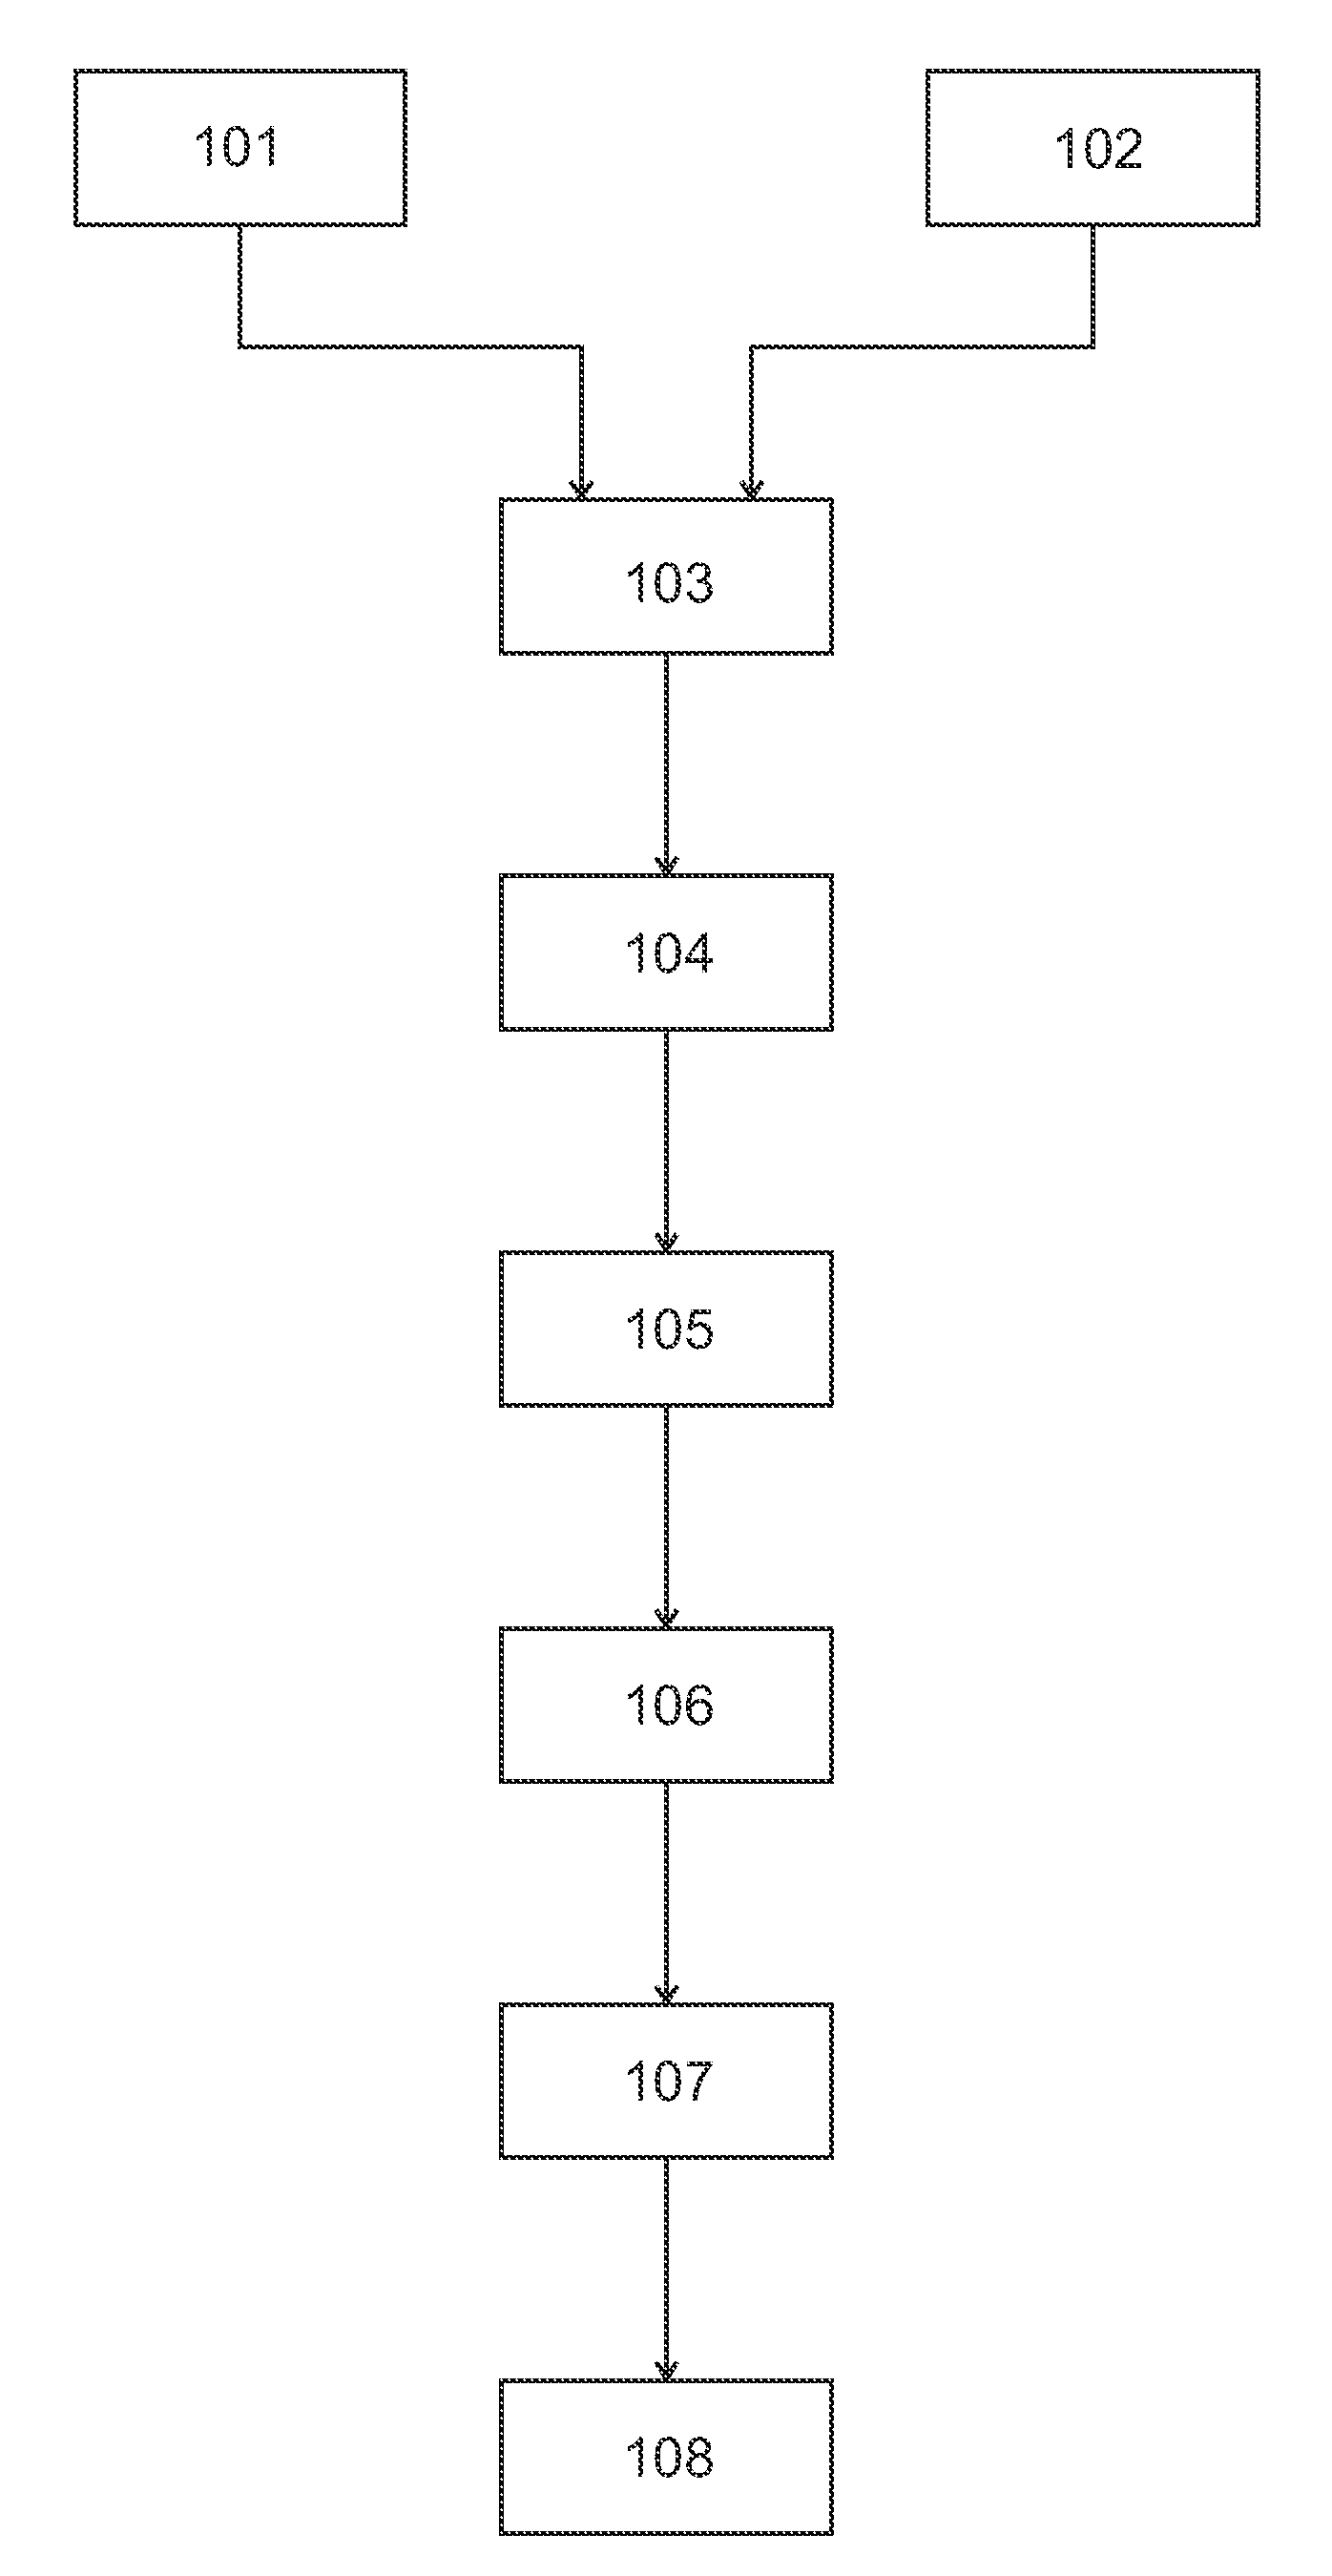 Infrared resolution and contrast enhancement with fusion